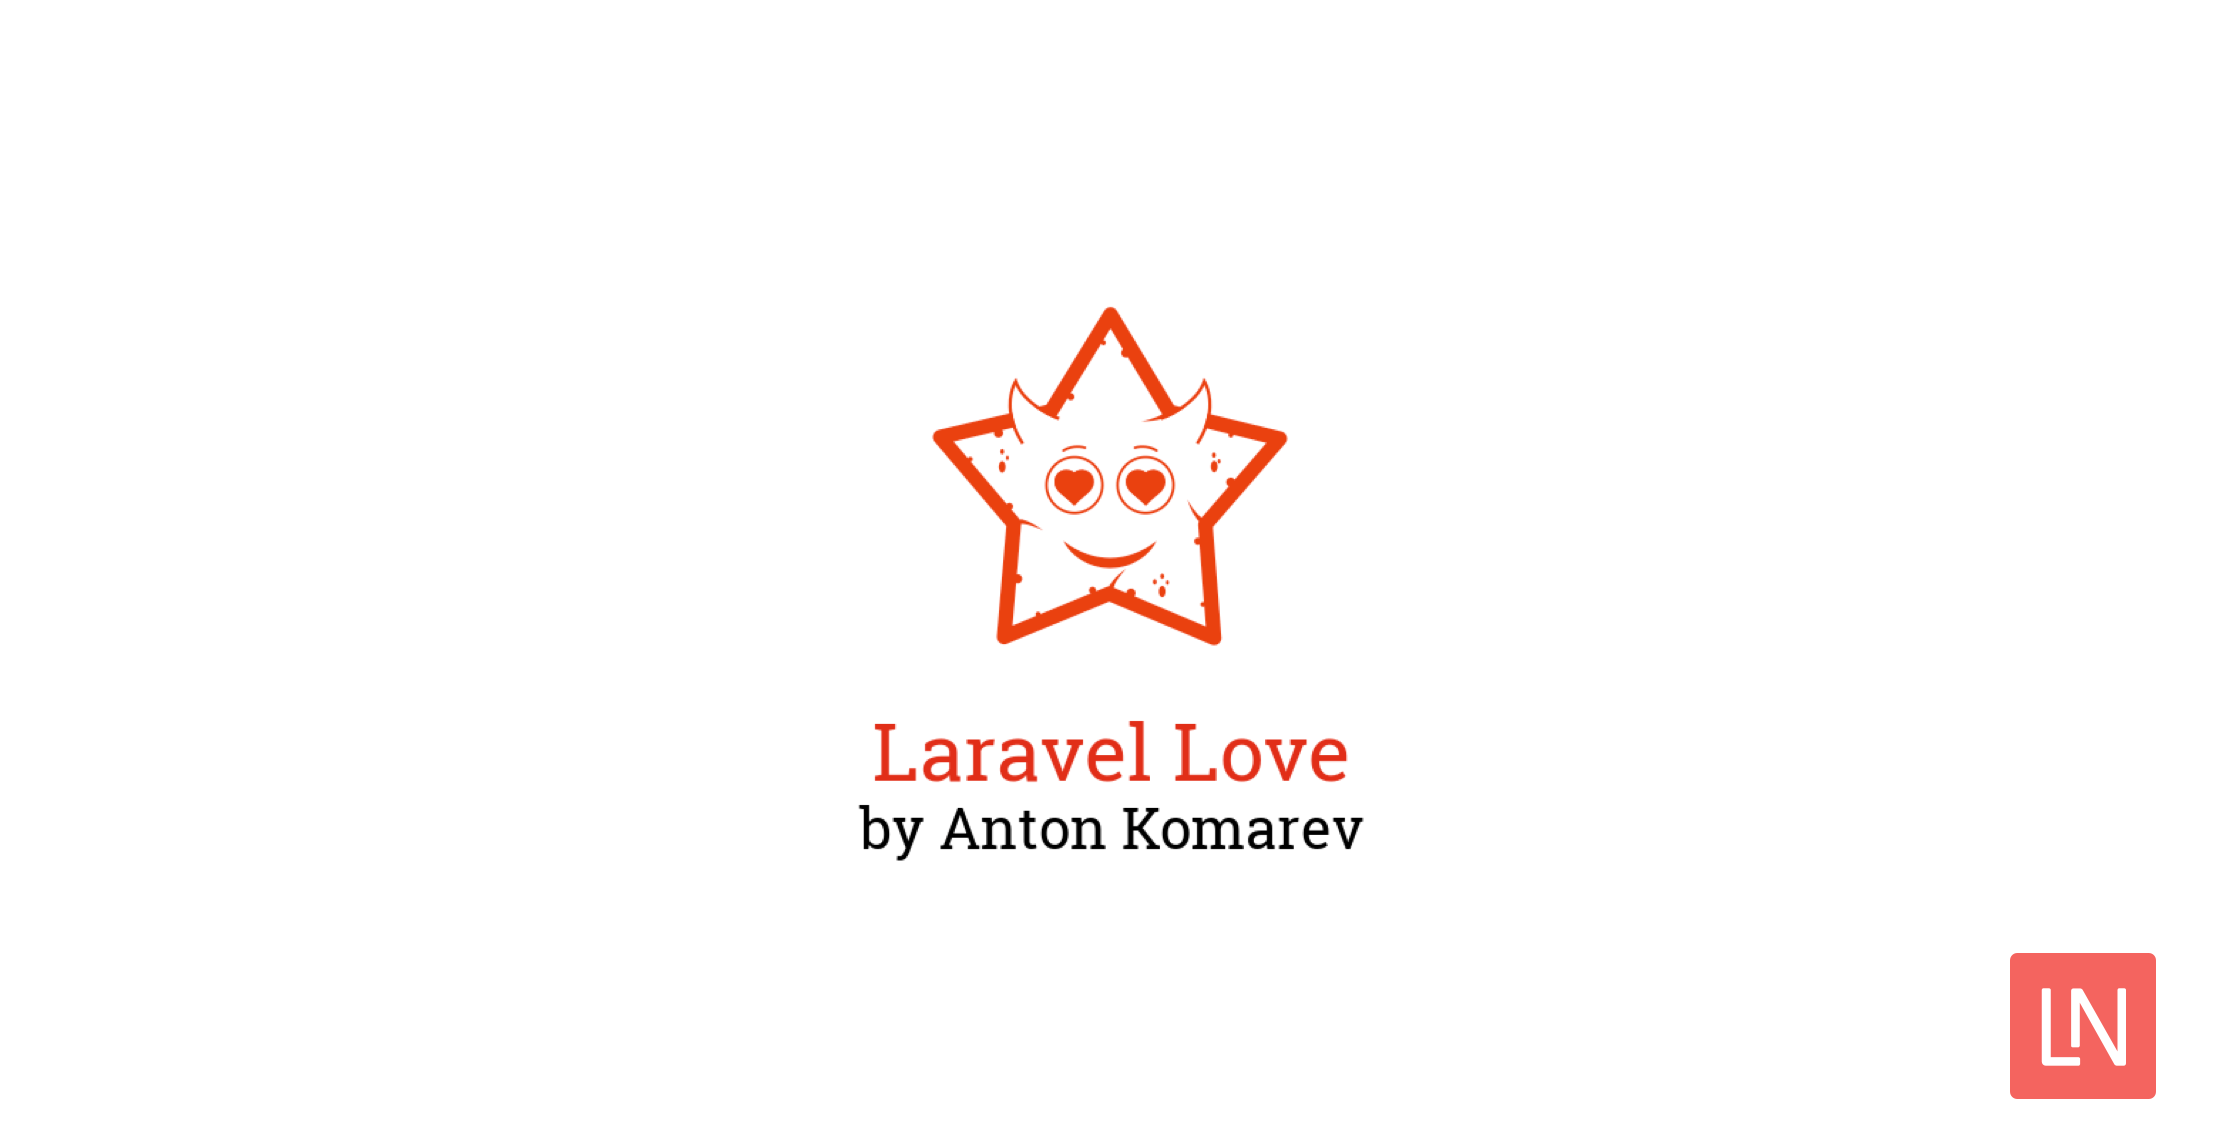 Add Social Reactions to Model with Laravel Love image